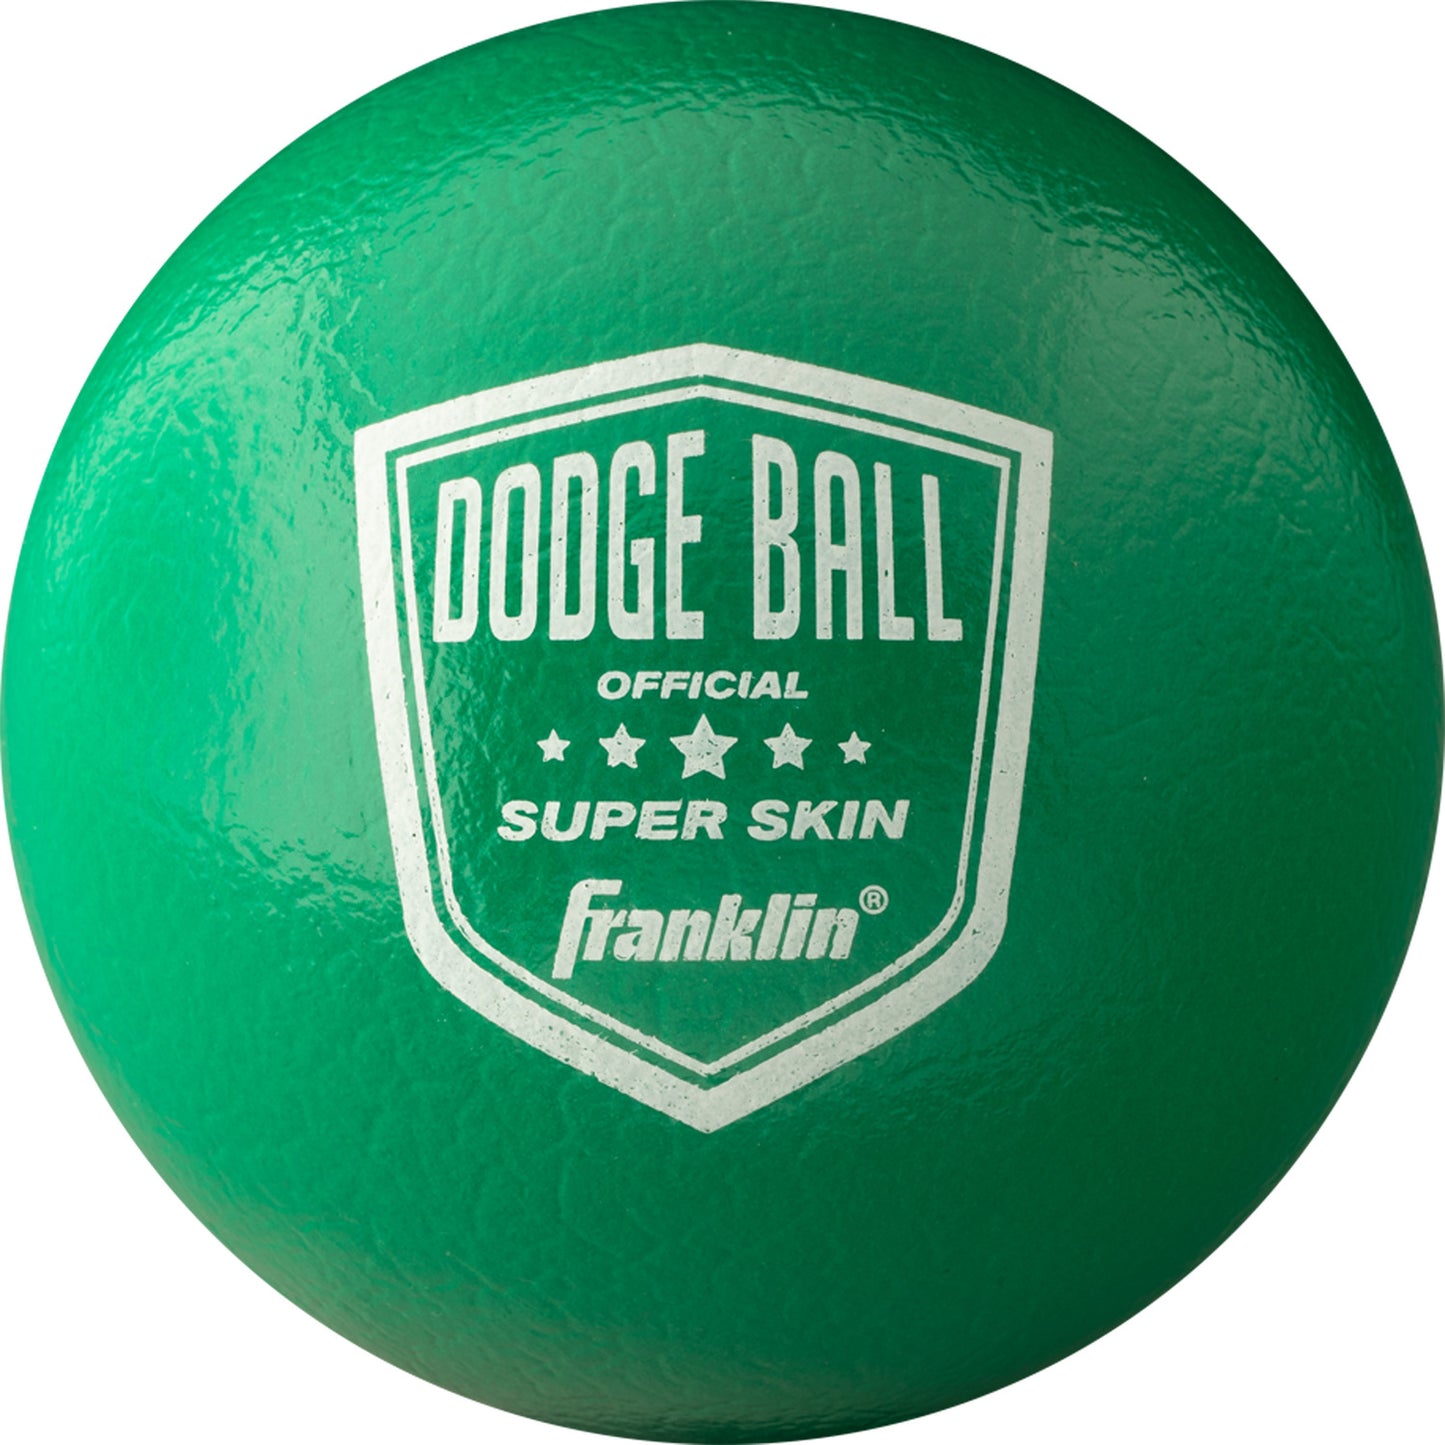 6 Superskin Dodge Ball (Assorted Colors)